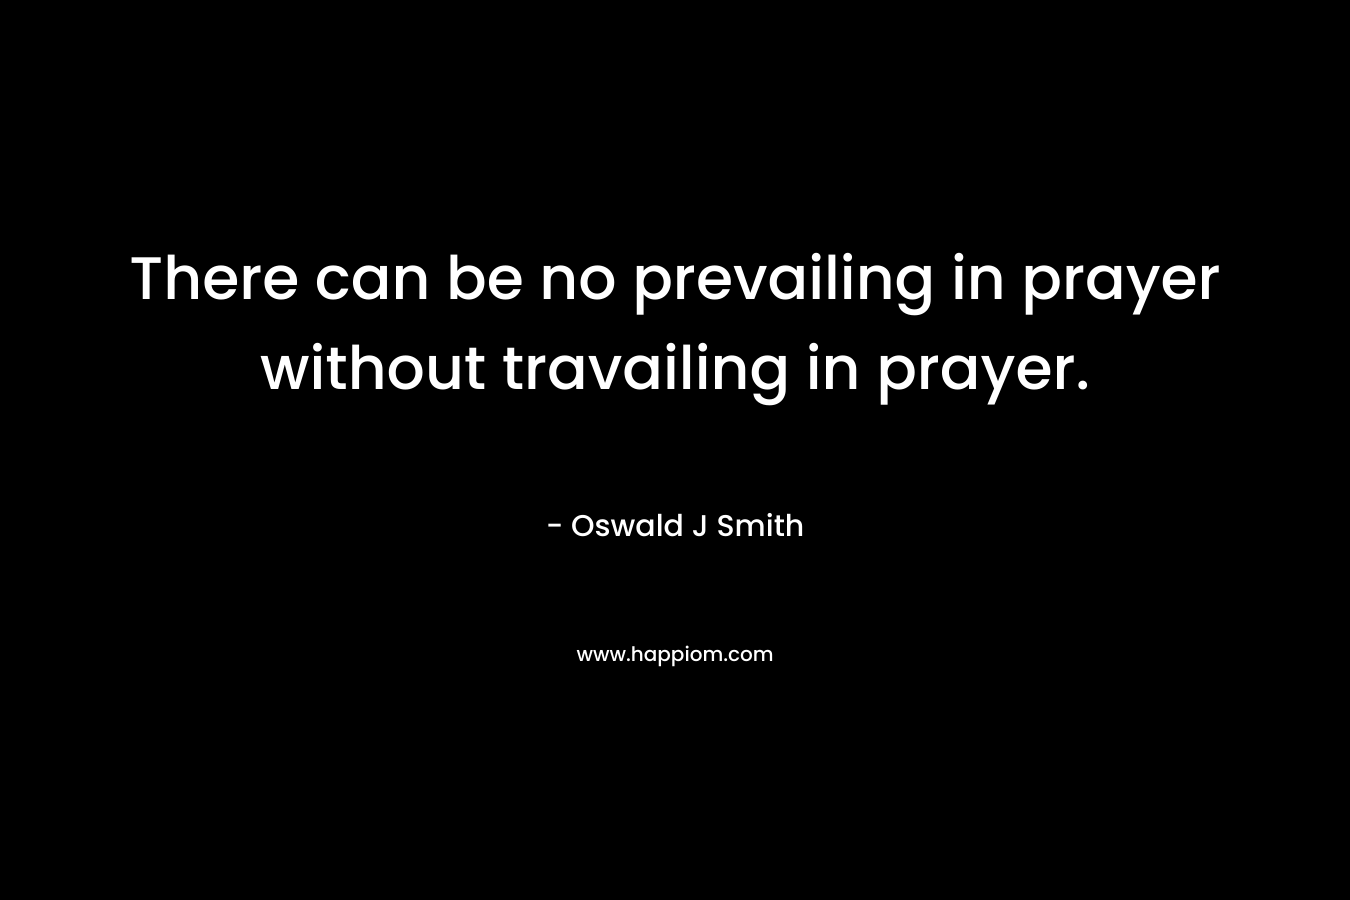 There can be no prevailing in prayer without travailing in prayer. – Oswald J Smith